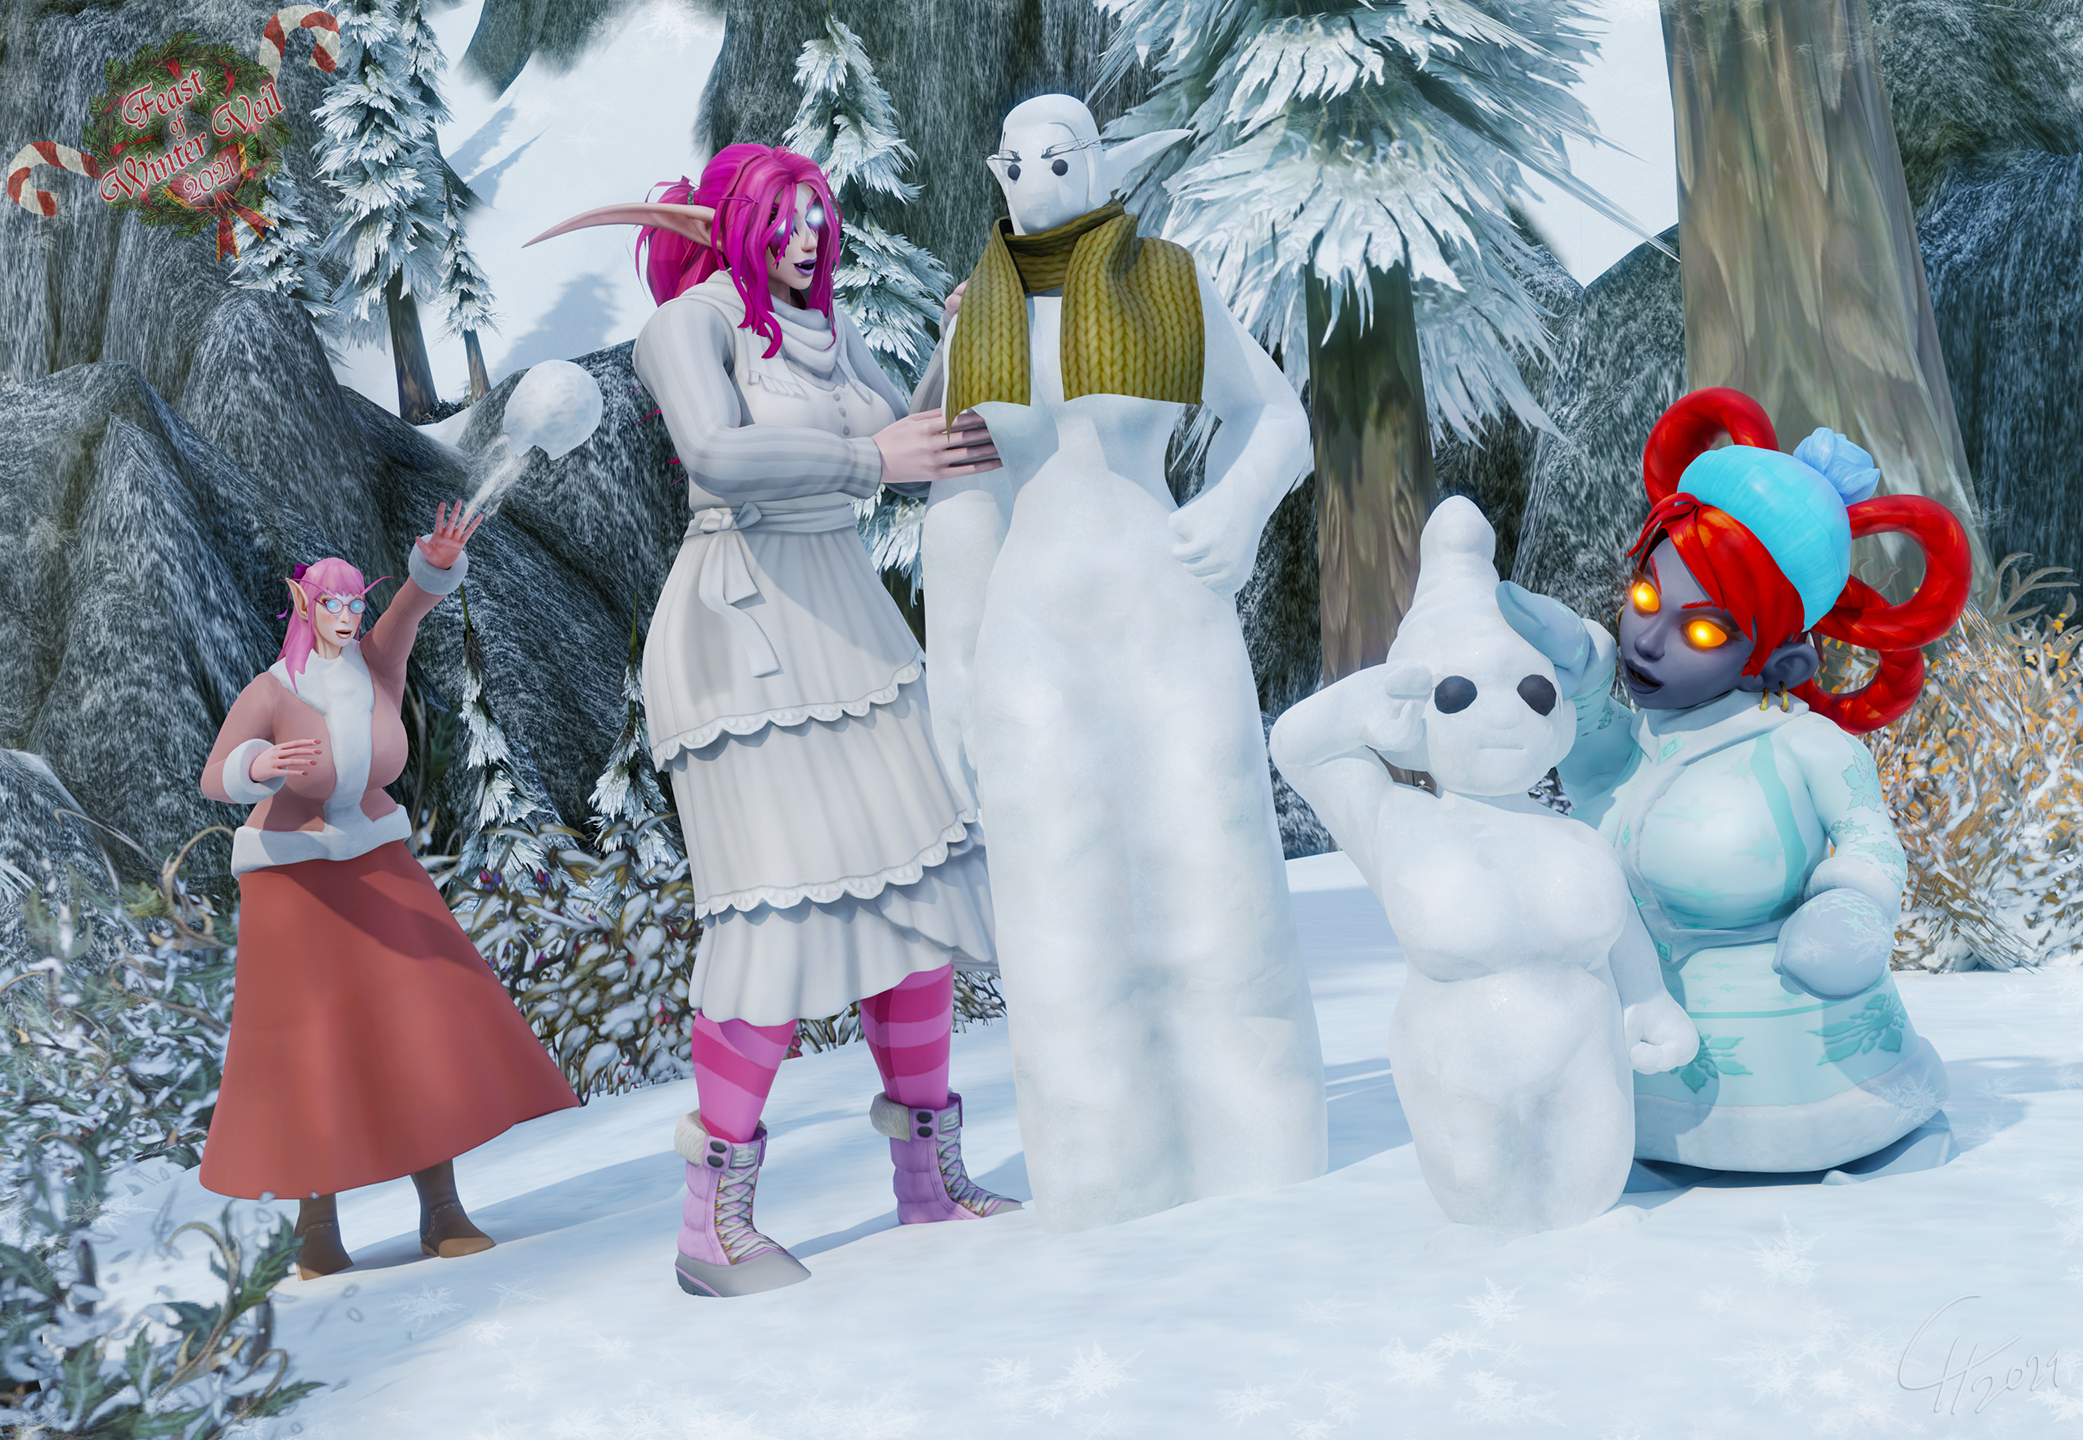 Winter Veil 2021: Gleeful Winter Fun Time [Nelf/Gnome/Half-elf/SWF/Comm]
Year has passend since the trio were together,
this time it is winter and what fun they can have
during the snowy season! Make snowelves and
snowgnomes or be the catalyst for snowfight!
[b][url=http://bakaras.com/murlocish/albums/userpics/10001/12/WinterVeil2021-03XL.png]==XL-Size Edit==[/url][/b]
Keywords: commission;OC;nelf;gnome;half-elf;SFW;dark iron gnome